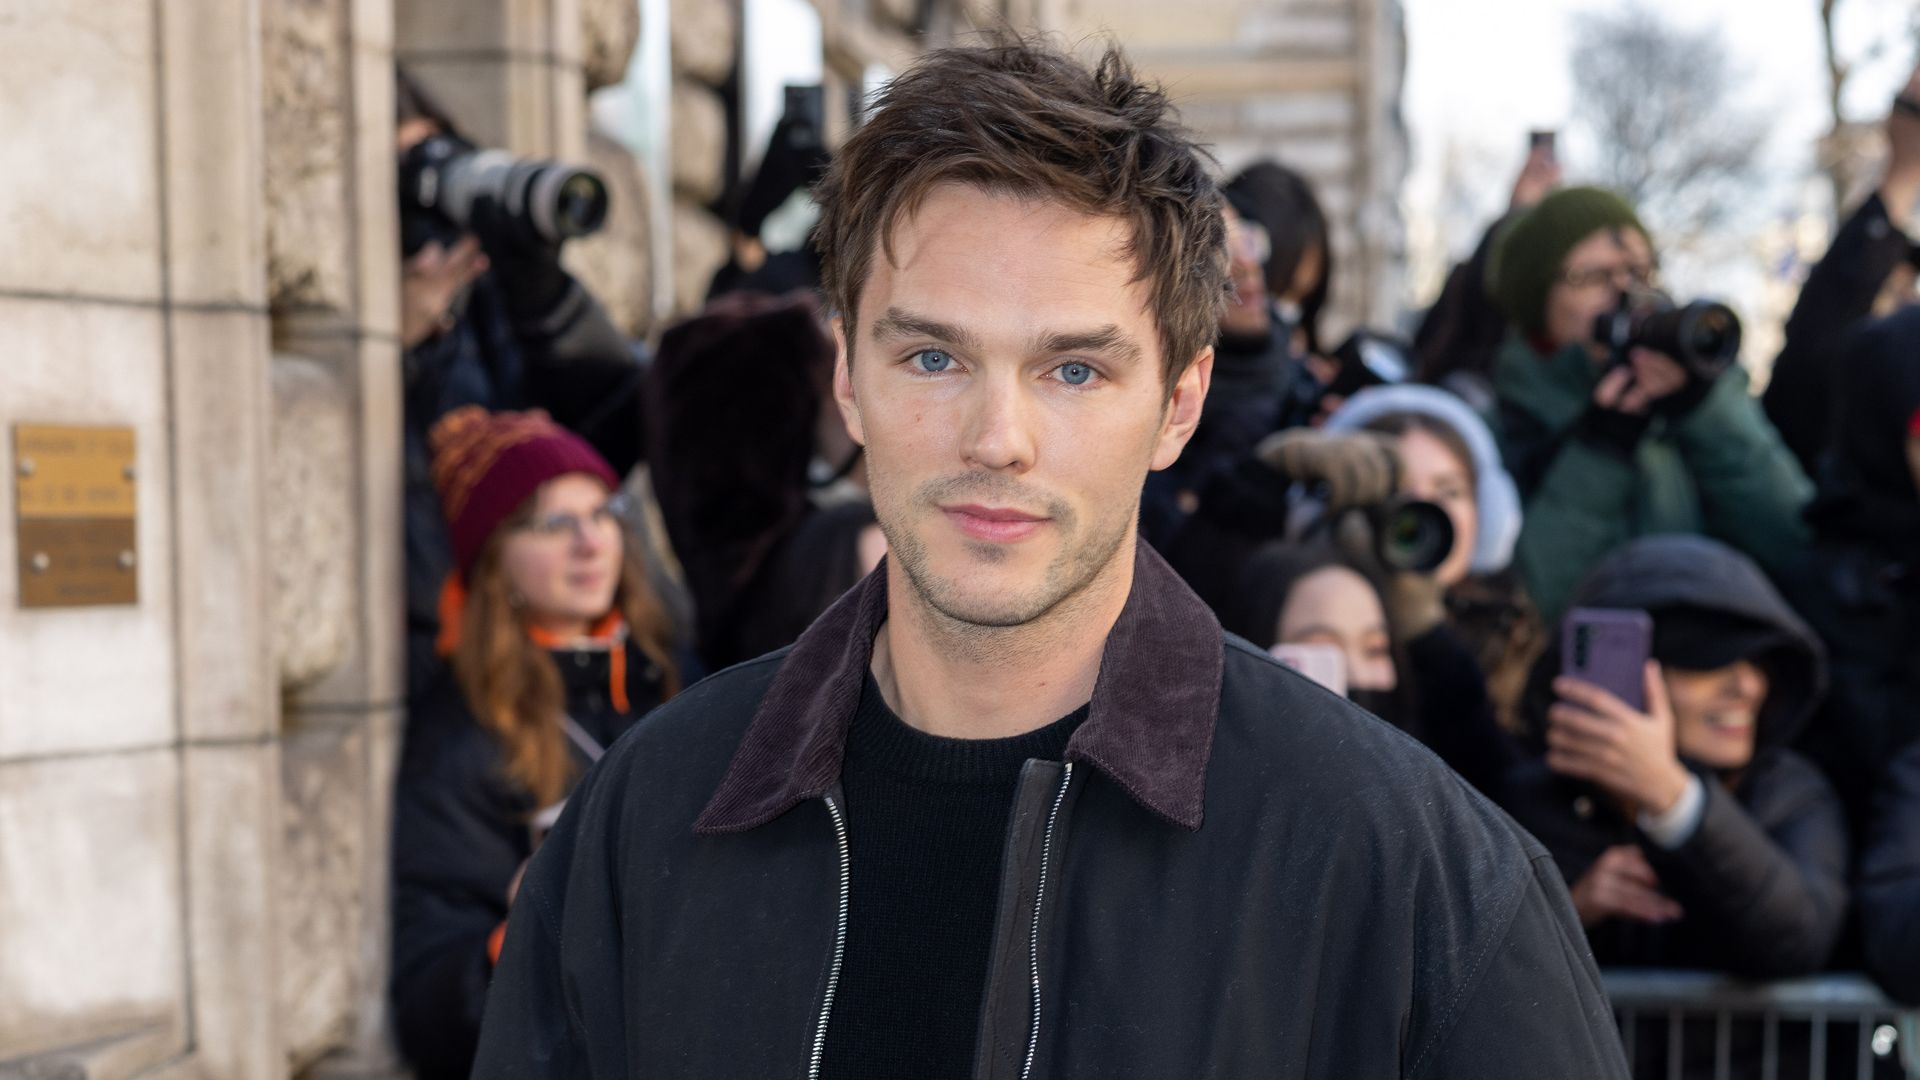 Nicholas Hoult pictured in rare photo with son Joaquin, 5, as he unveils major transformation